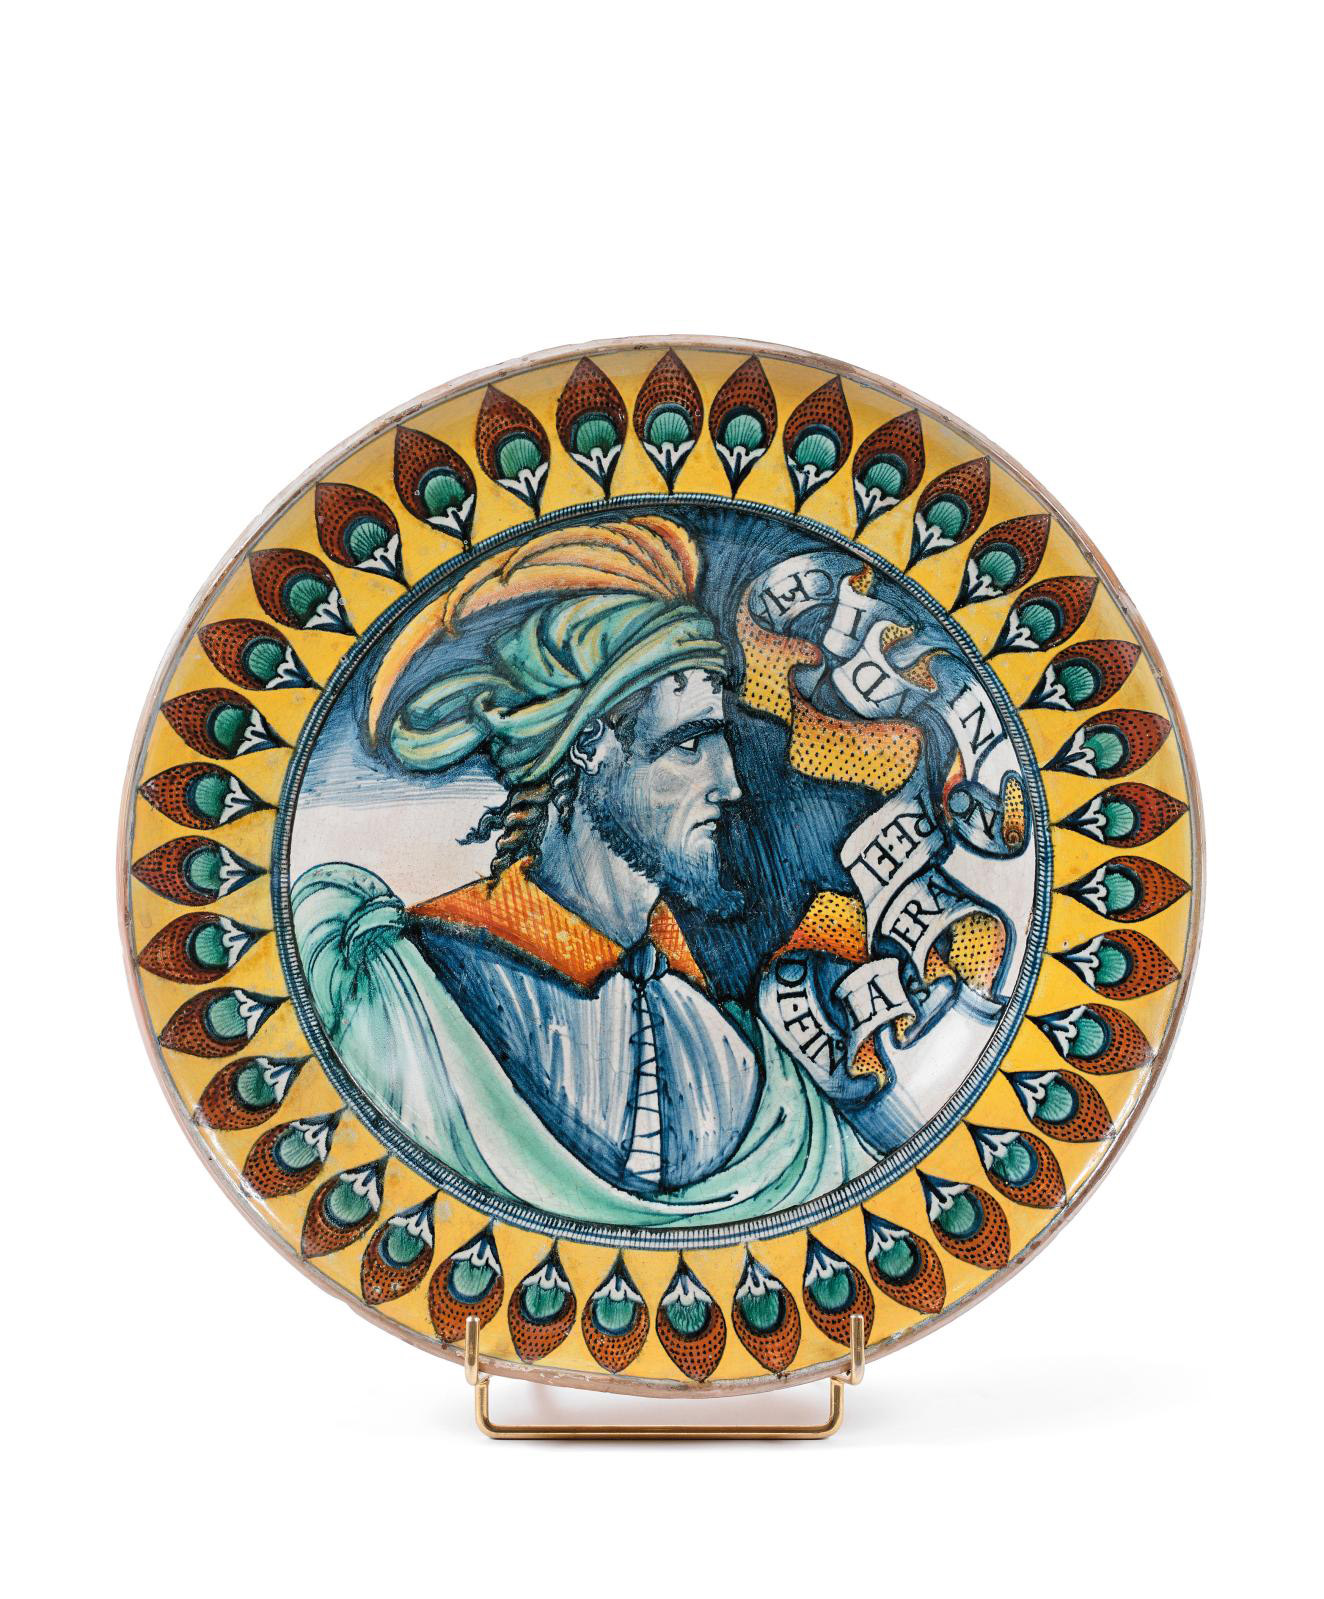 This round majolica dish (diam. 48 cm/18.90 in) featuring the polychrome bust of a man in profile wearing a feathered headdress sold for €